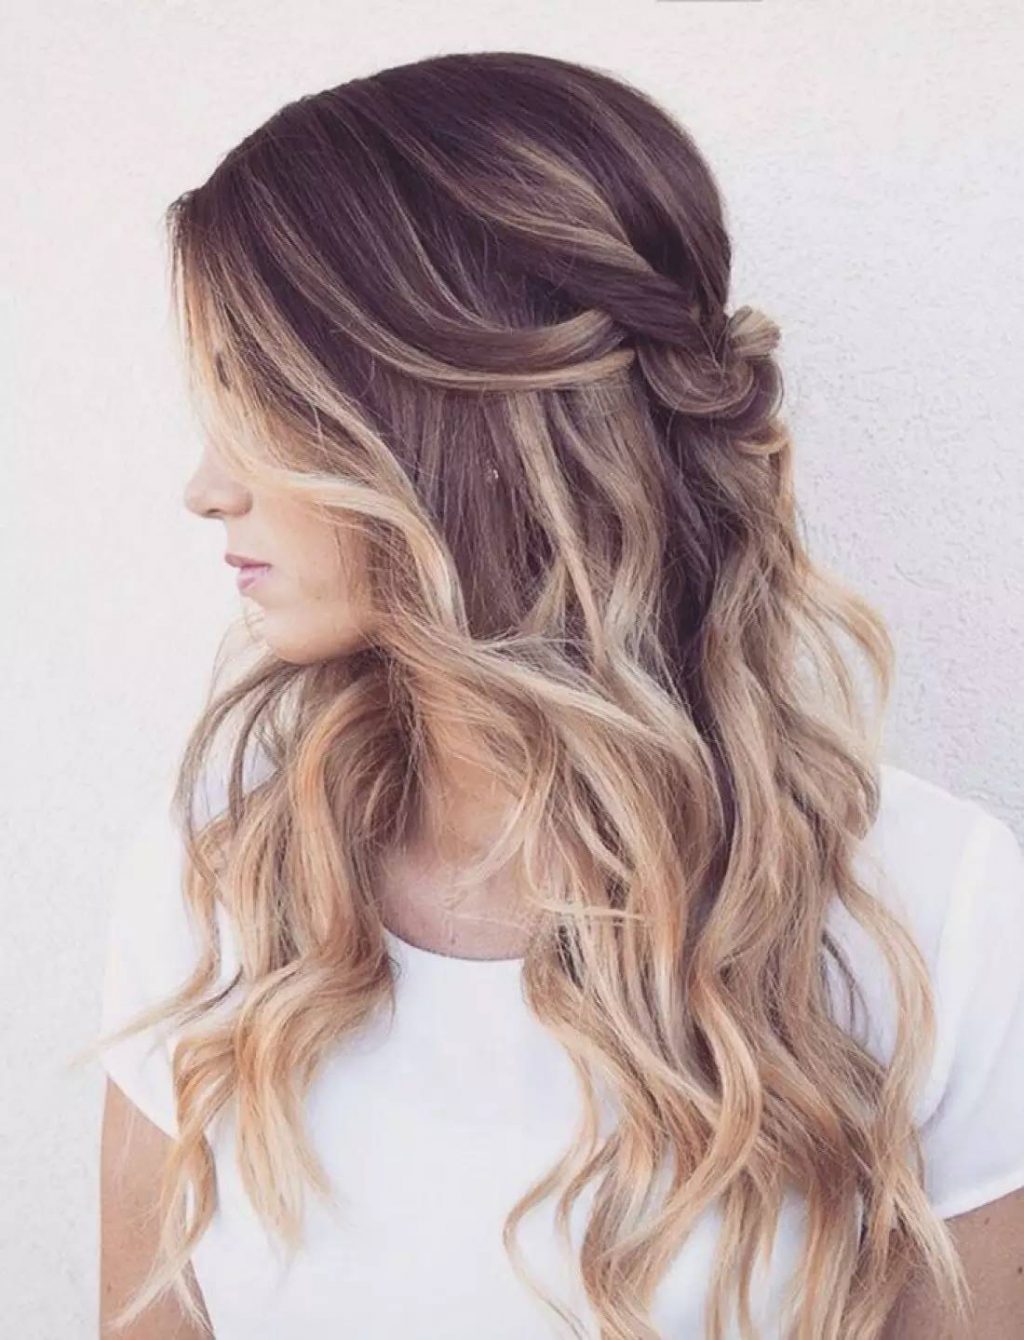 Wavy Half Up Hairstyle